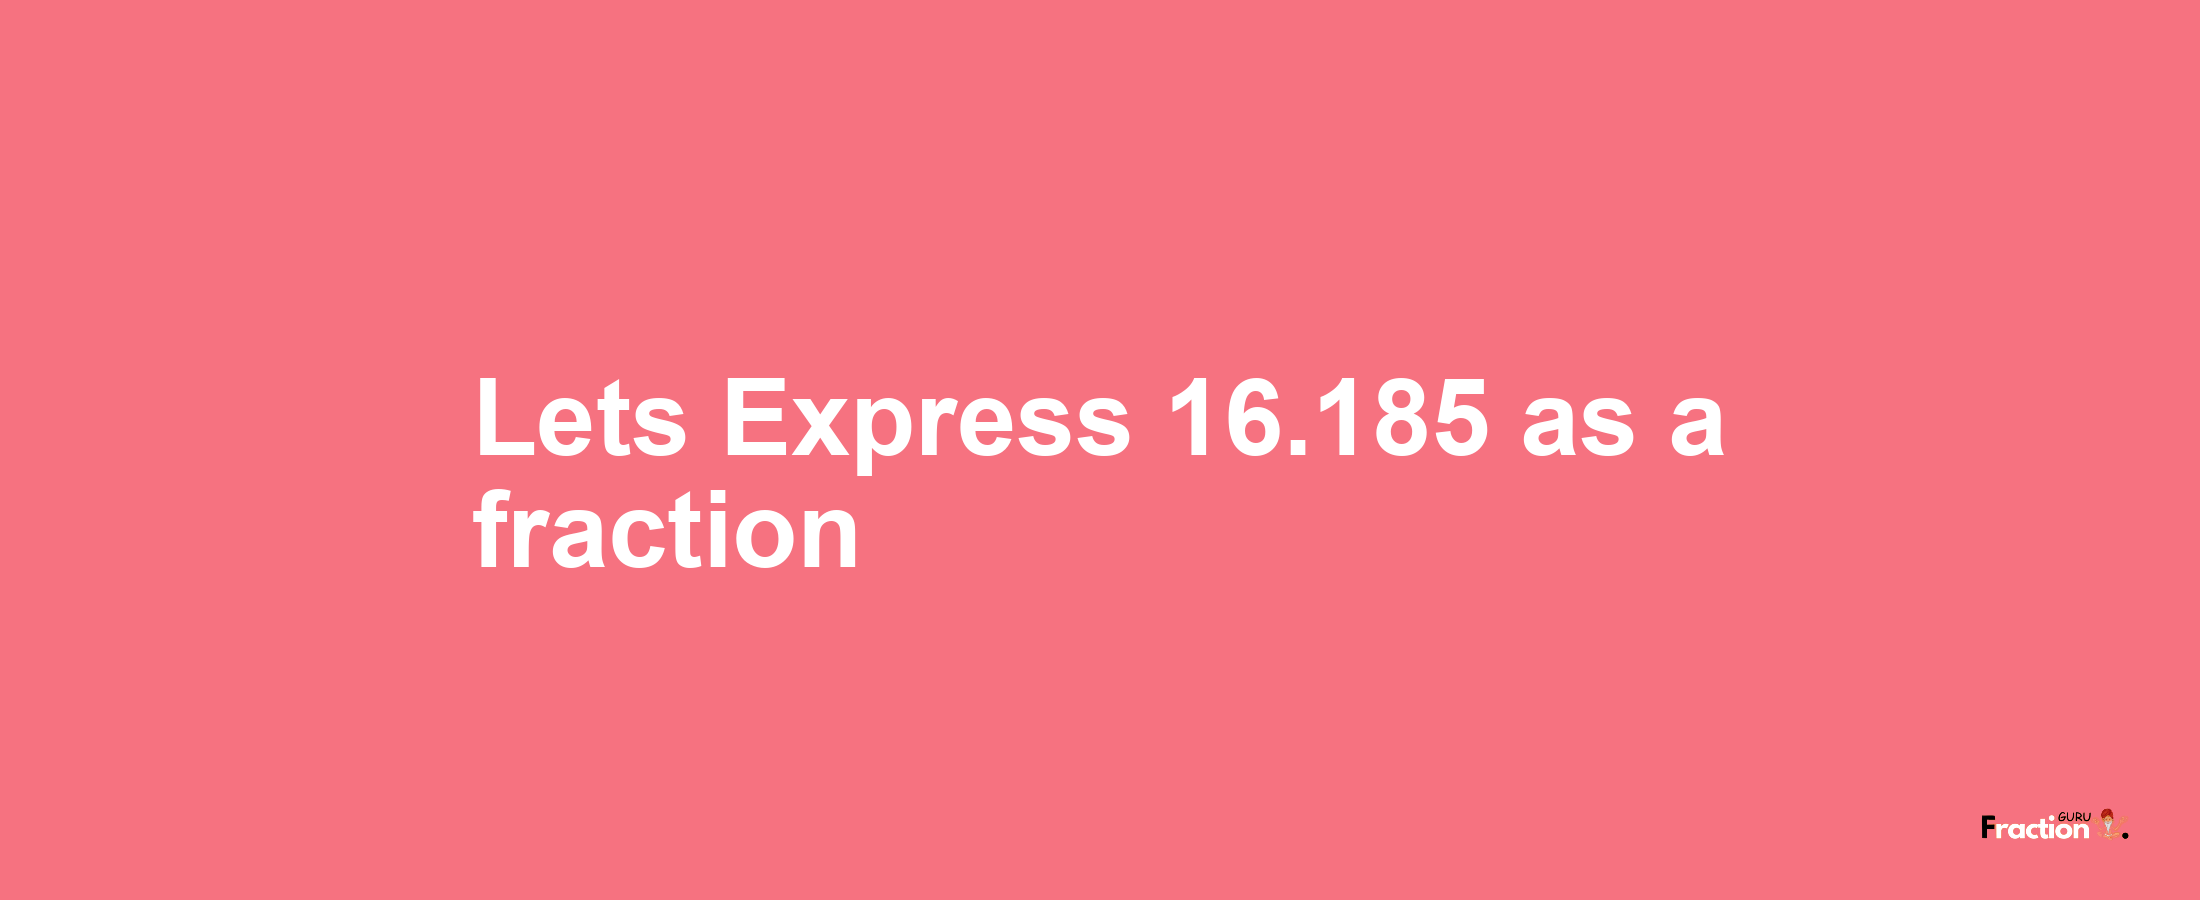 Lets Express 16.185 as afraction